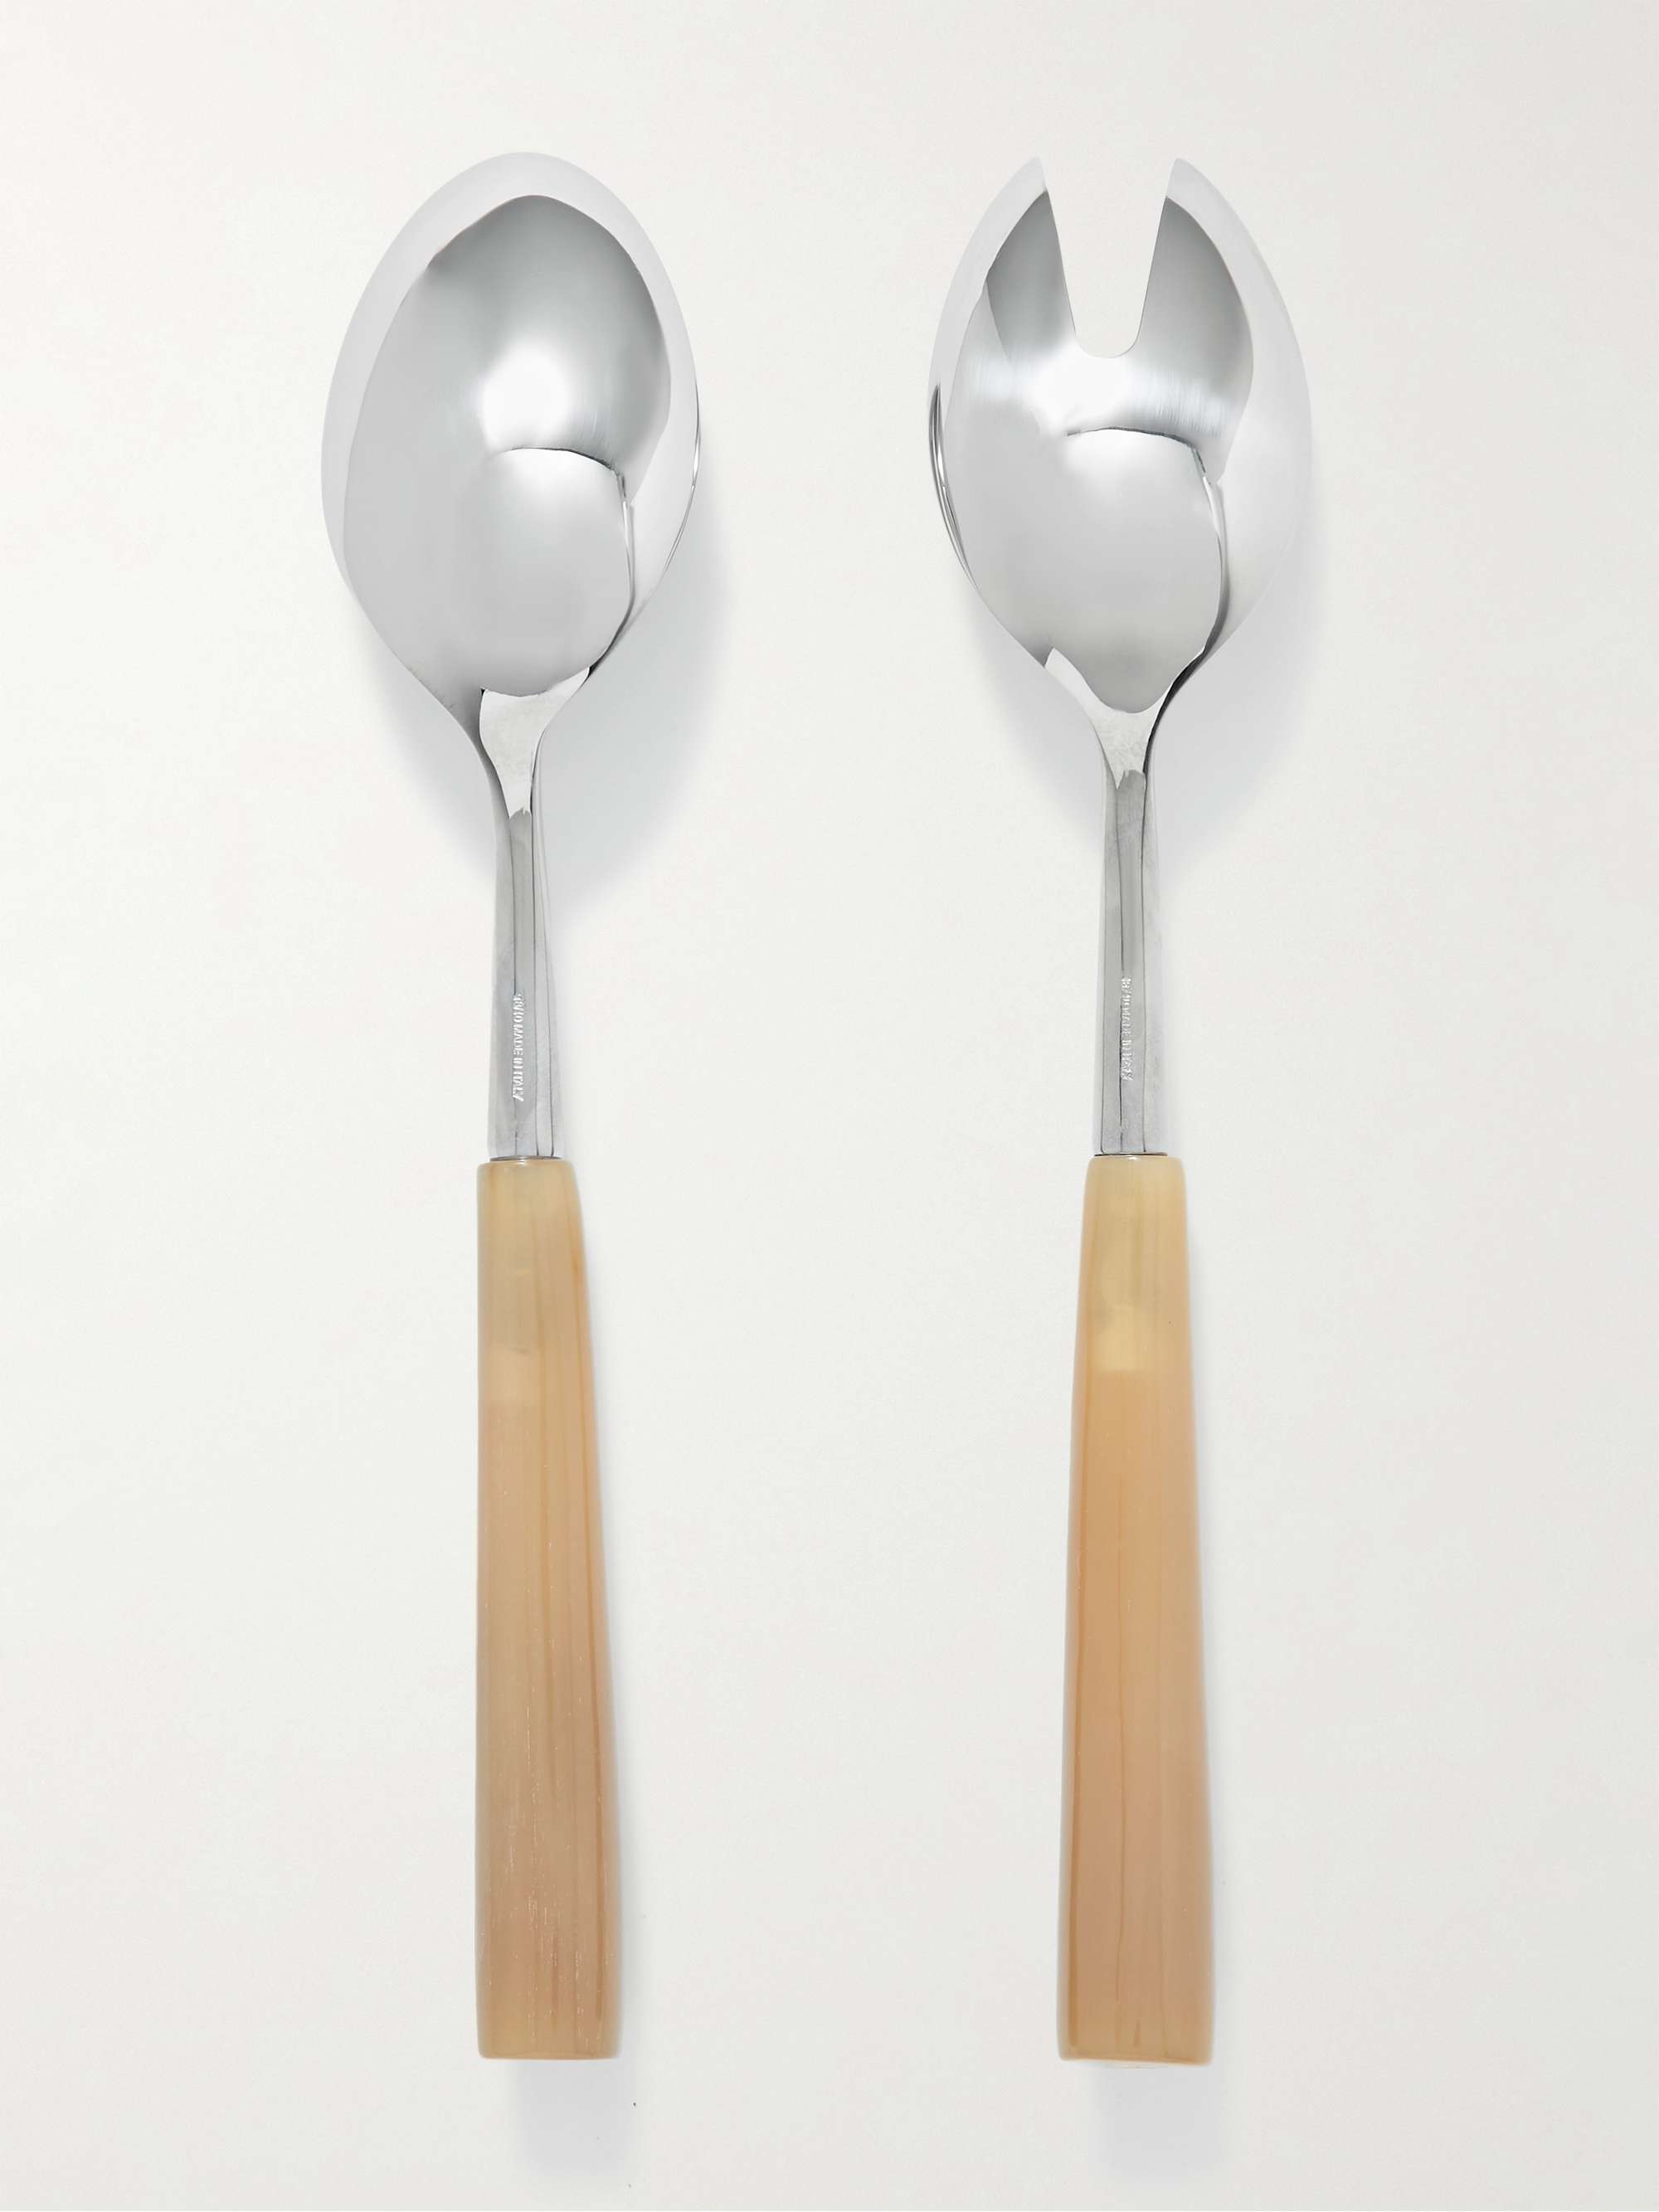 BRUNELLO CUCINELLI Set of Two Silver and Horn Serving Spoons